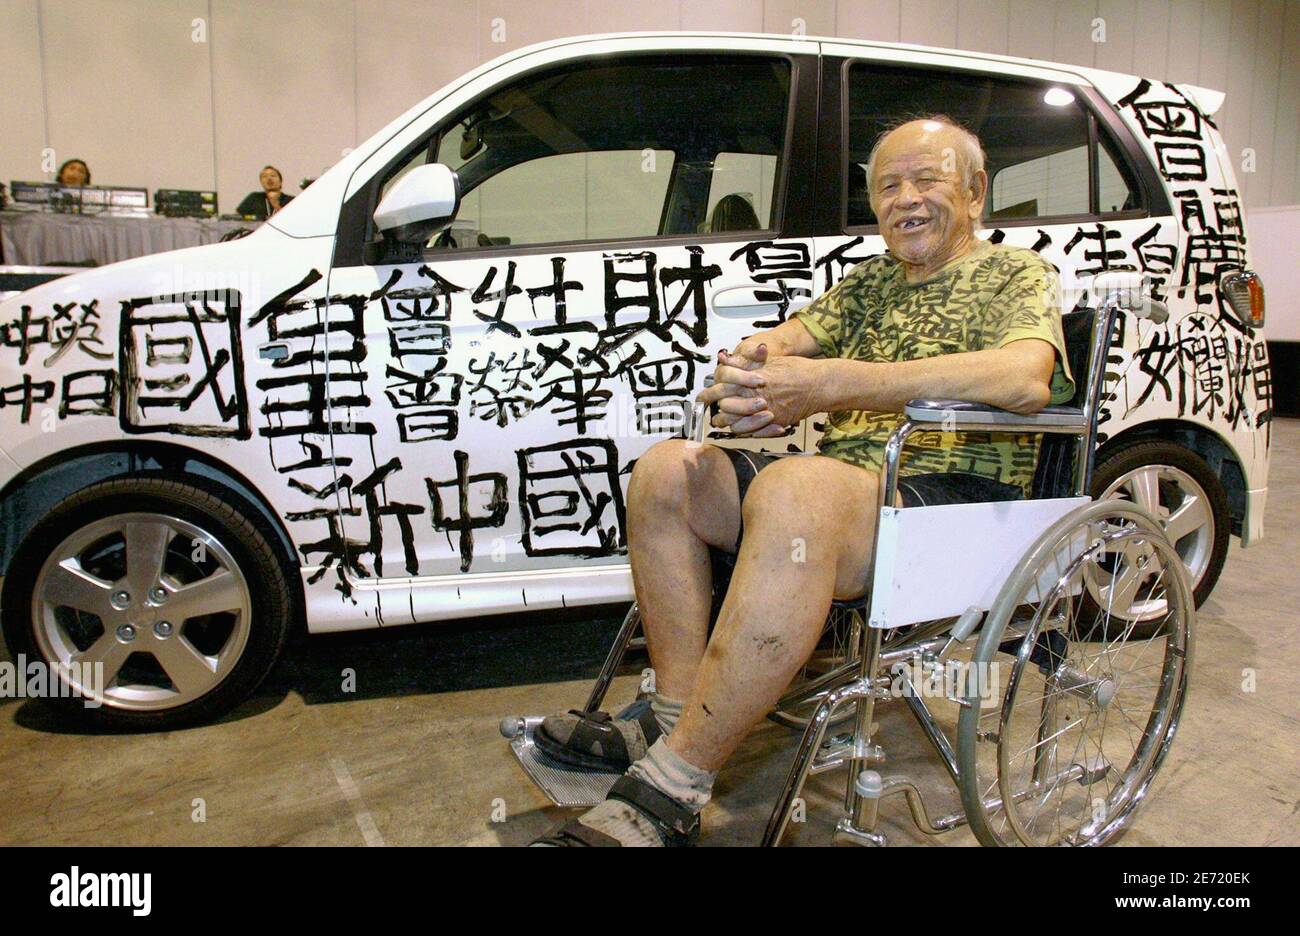 Hong Kong's graffiti king Tsang Tsou-choi poses with a Daihatsu car he decorated with his calligraphy during the 'Japan@Cool Expo' show in Hong Kong in this August 22, 2002 file photo. Tsang died on July 15, 2007 due to sickness in a hospital at the age of 86, his fashion designer friend William Tang told reporters on July 25, 2007. Tsang, also known as 'Kowloon Emperor', is dismissed by many people as just another old grubby loony, but his calligraphy graffiti have won international recognition as art, including sales at Sotheby's. For over four decades, he has been writing Chinese characters Stock Photo